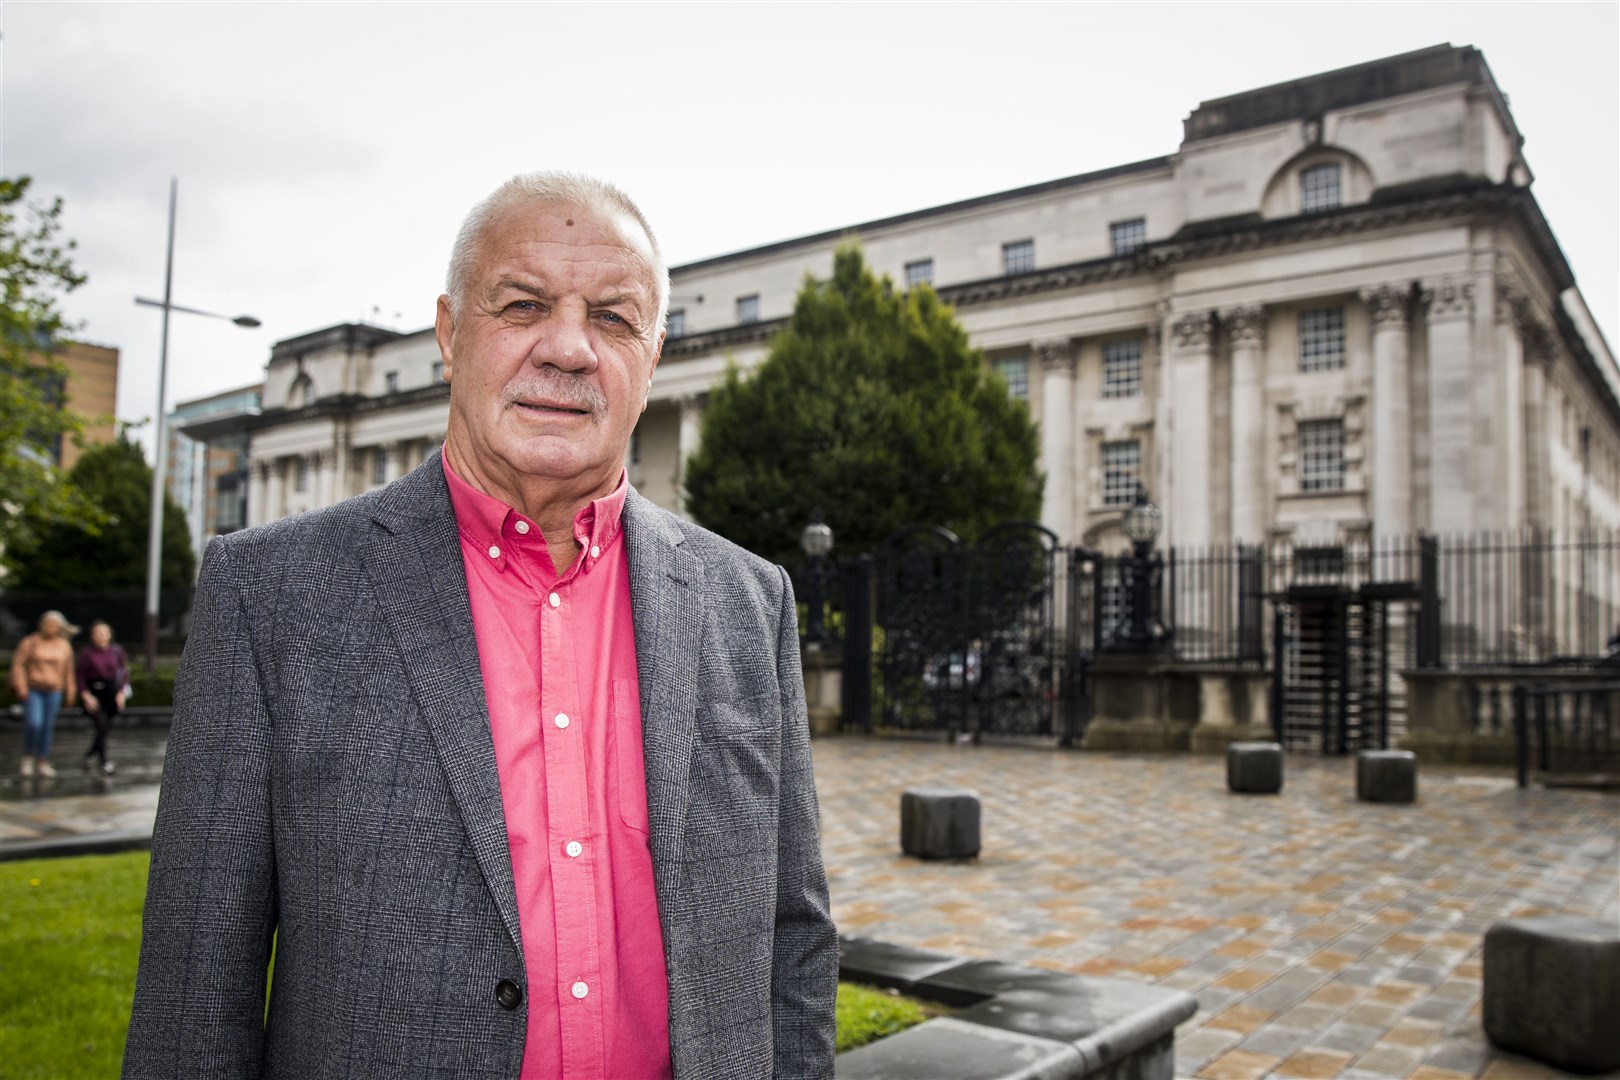 Victims campaigner Raymond McCord has launched a legal challenge (Liam McBurney/PA)